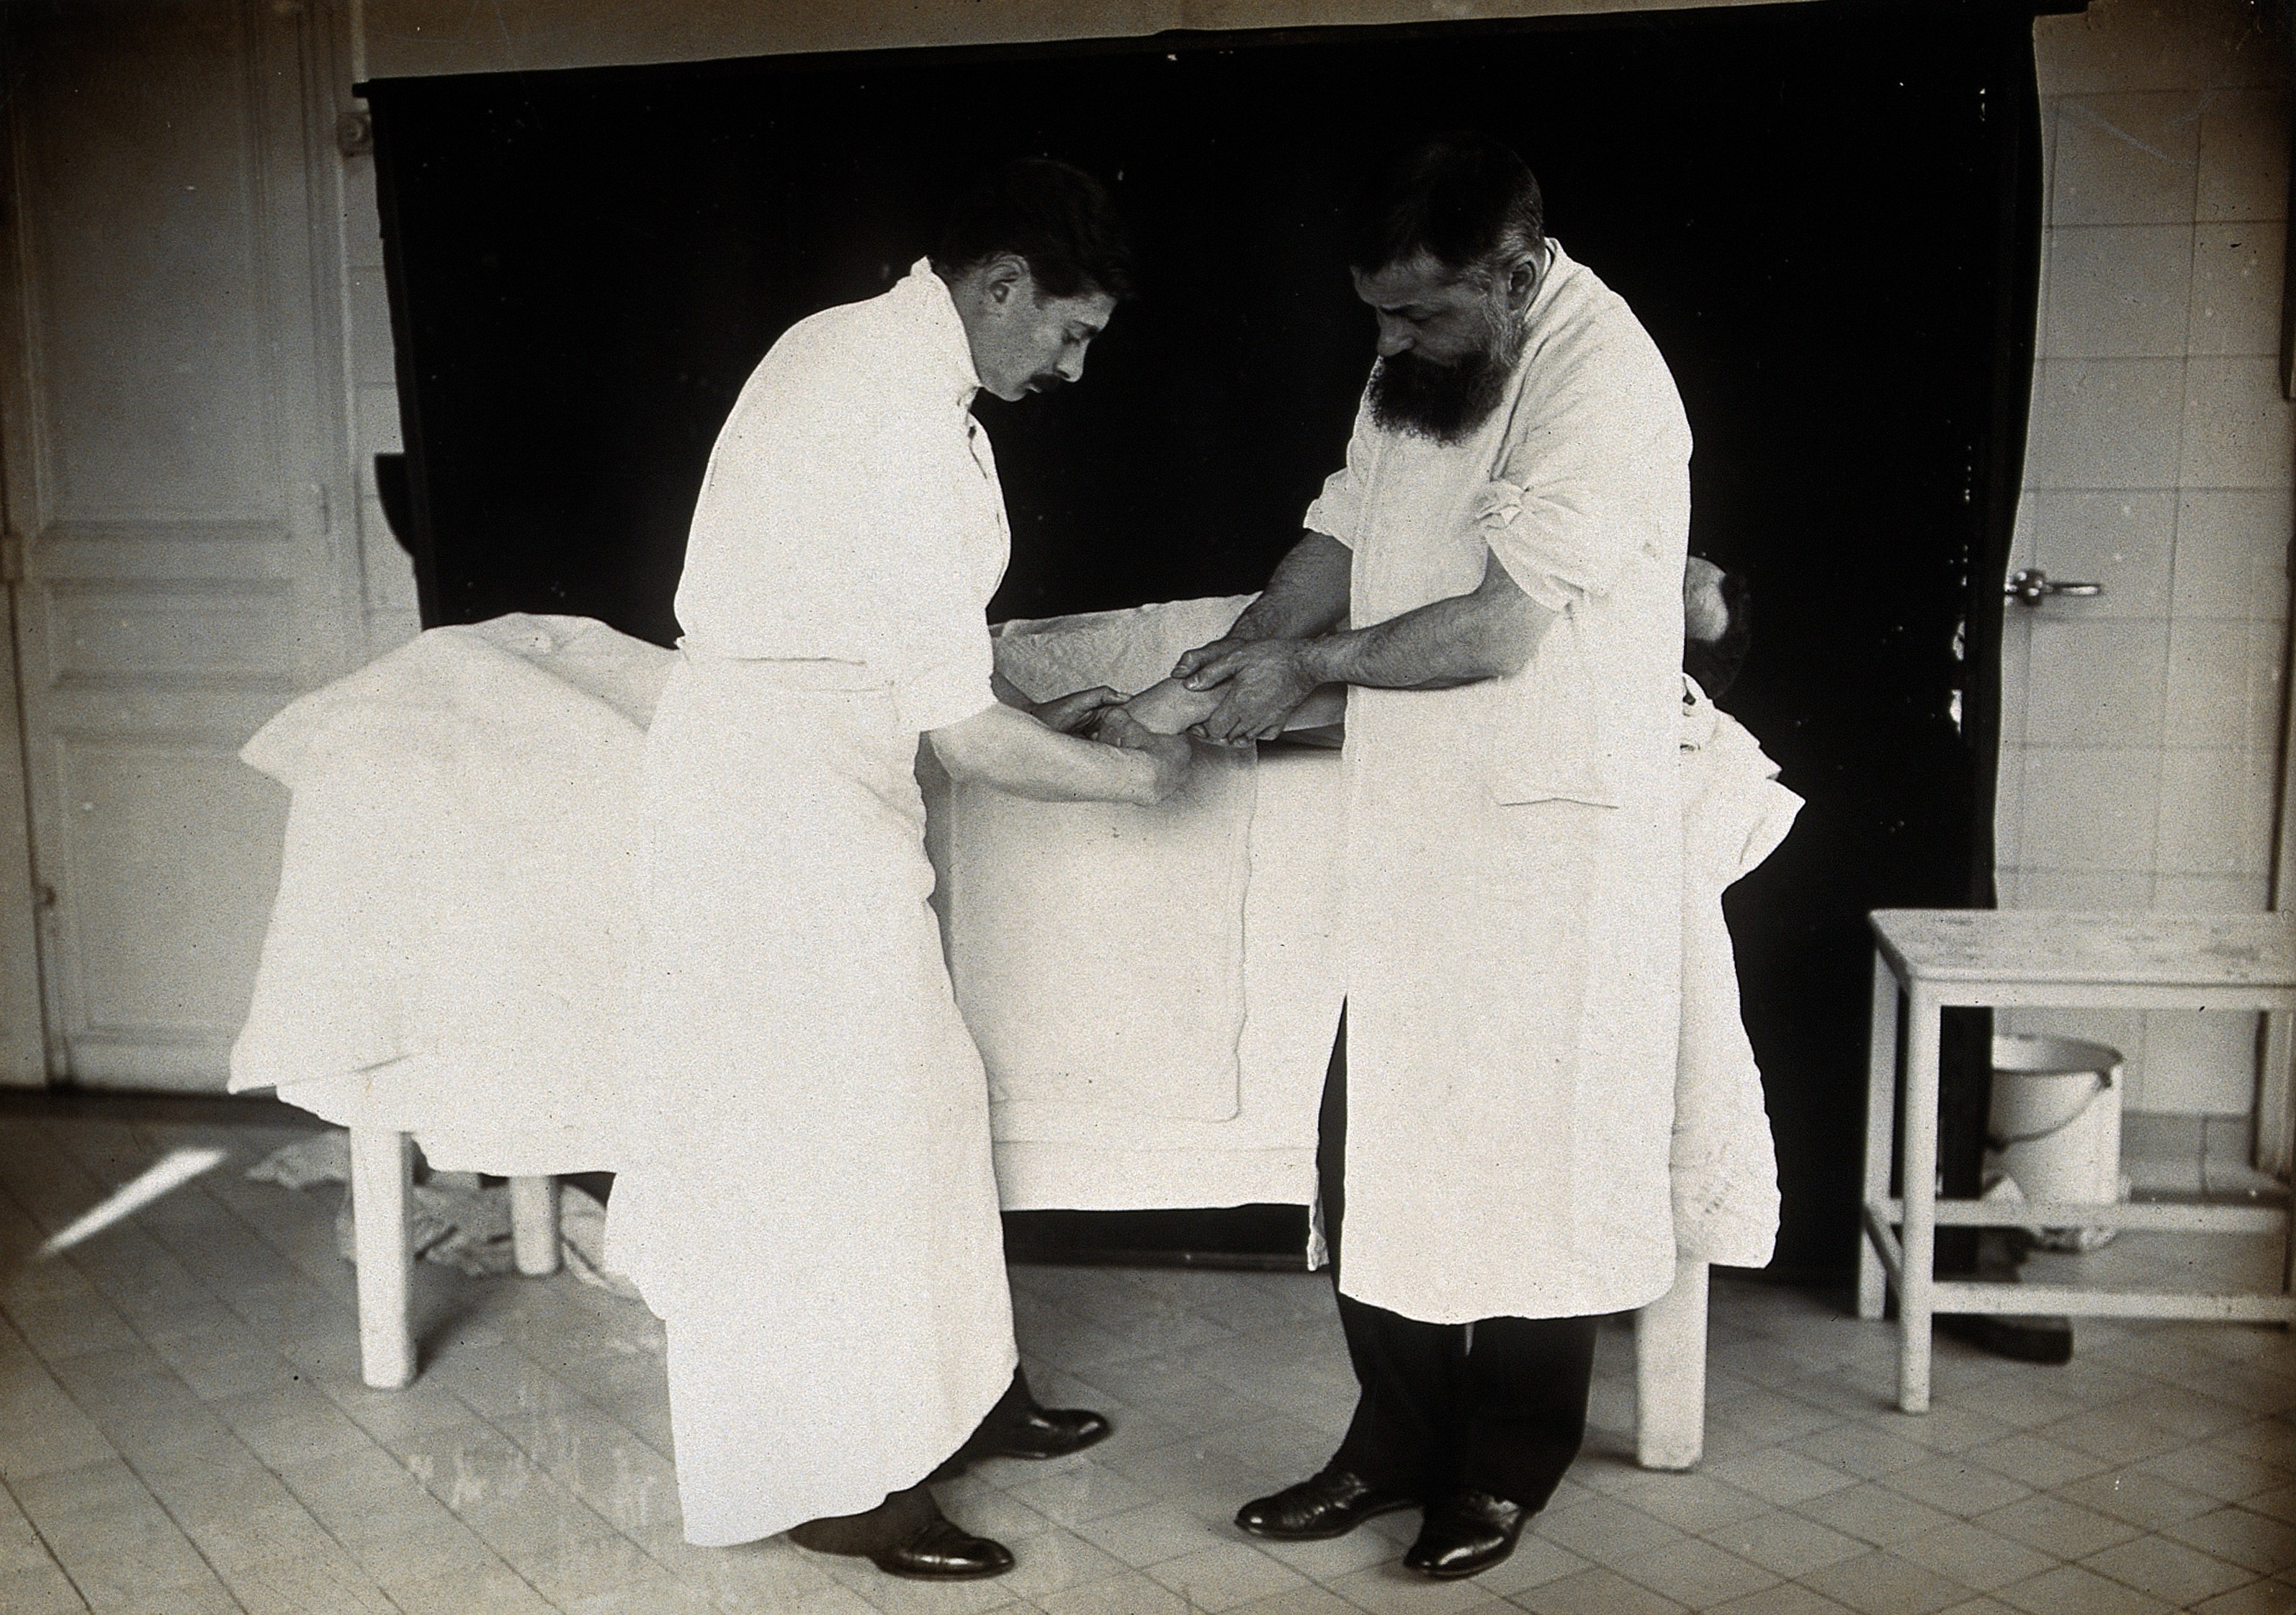 F. Lejars examining a patient. Photograph by E. Guillot. Wellcome V0028223